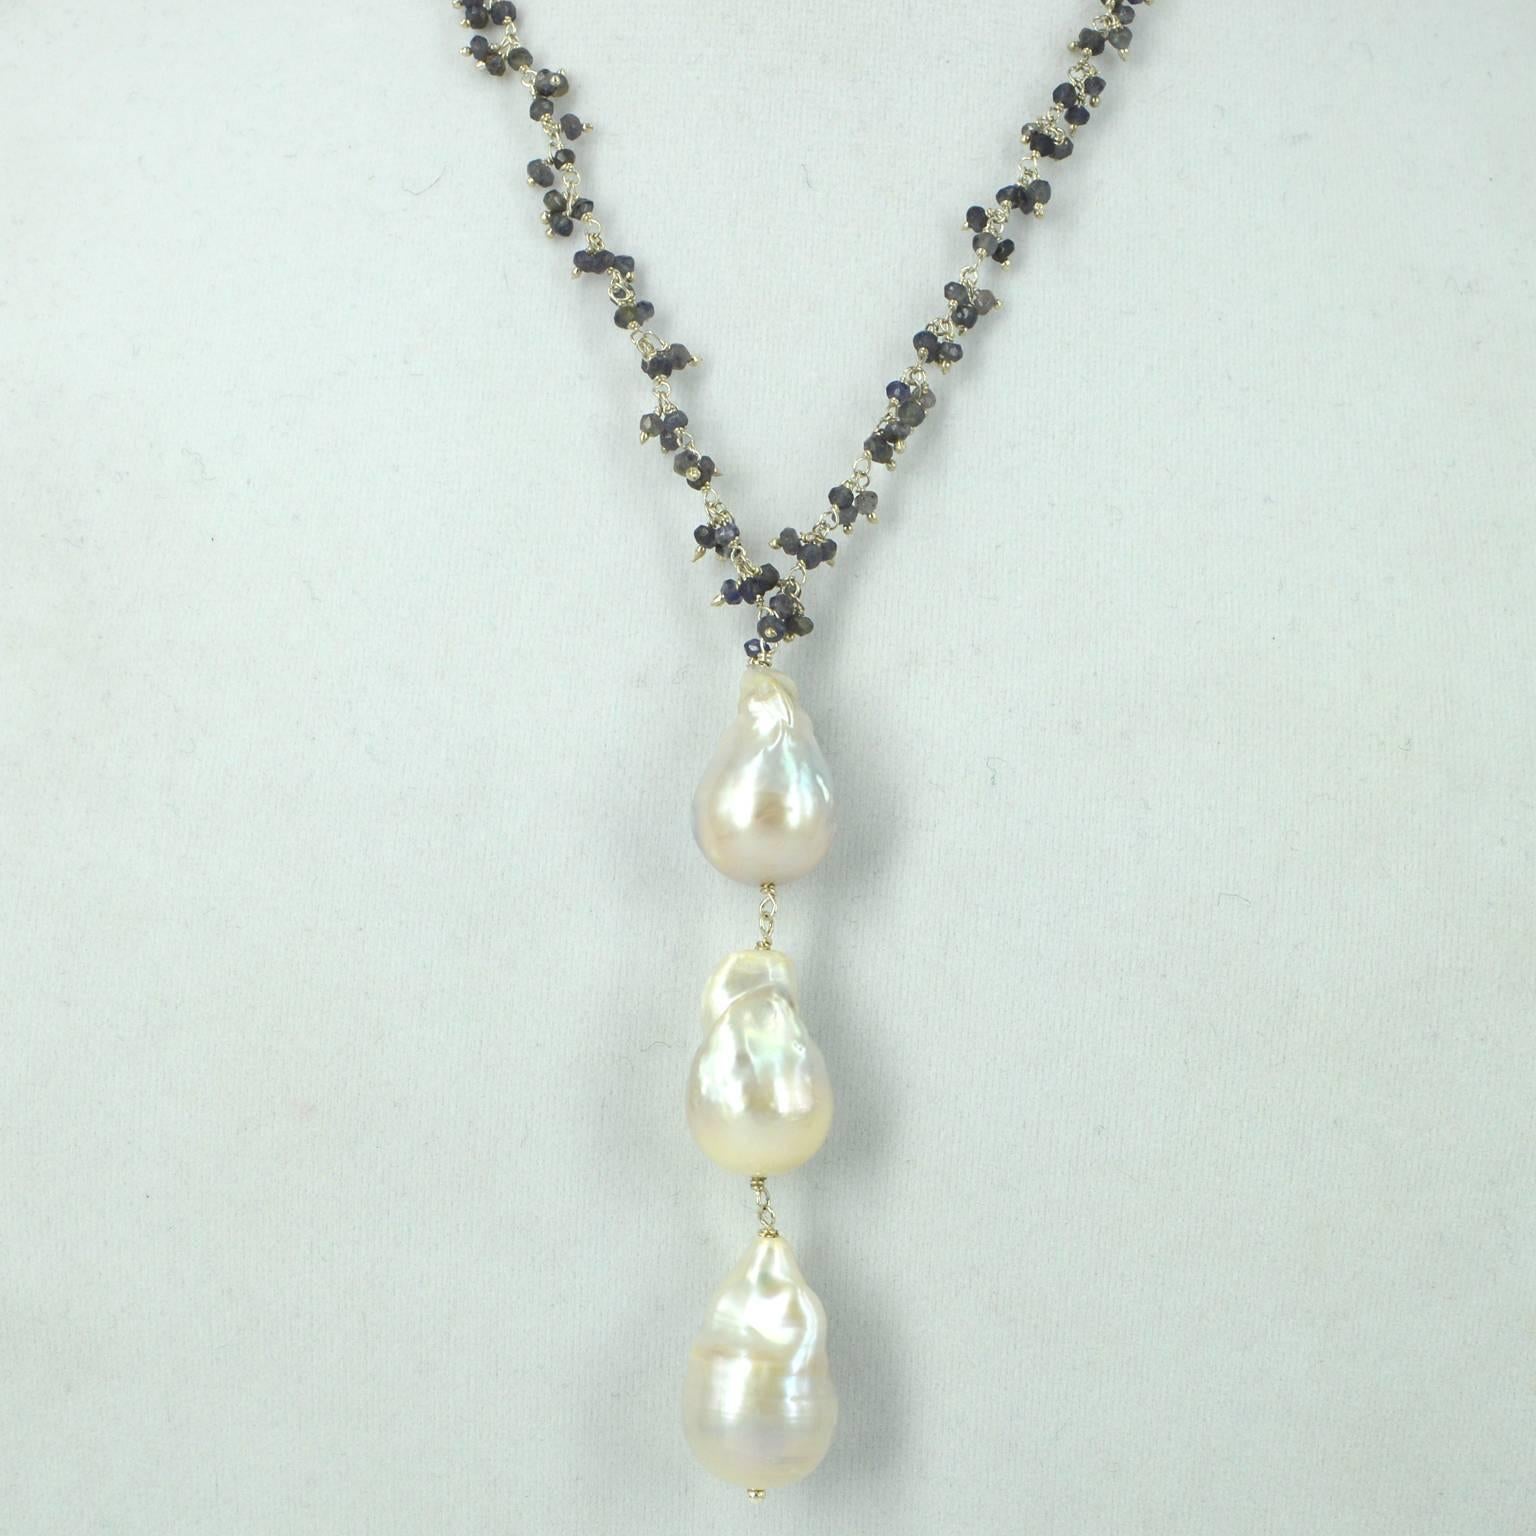 Modern Decadent Jewels Iolite and Baroque Pearl Silver Pendant Necklace